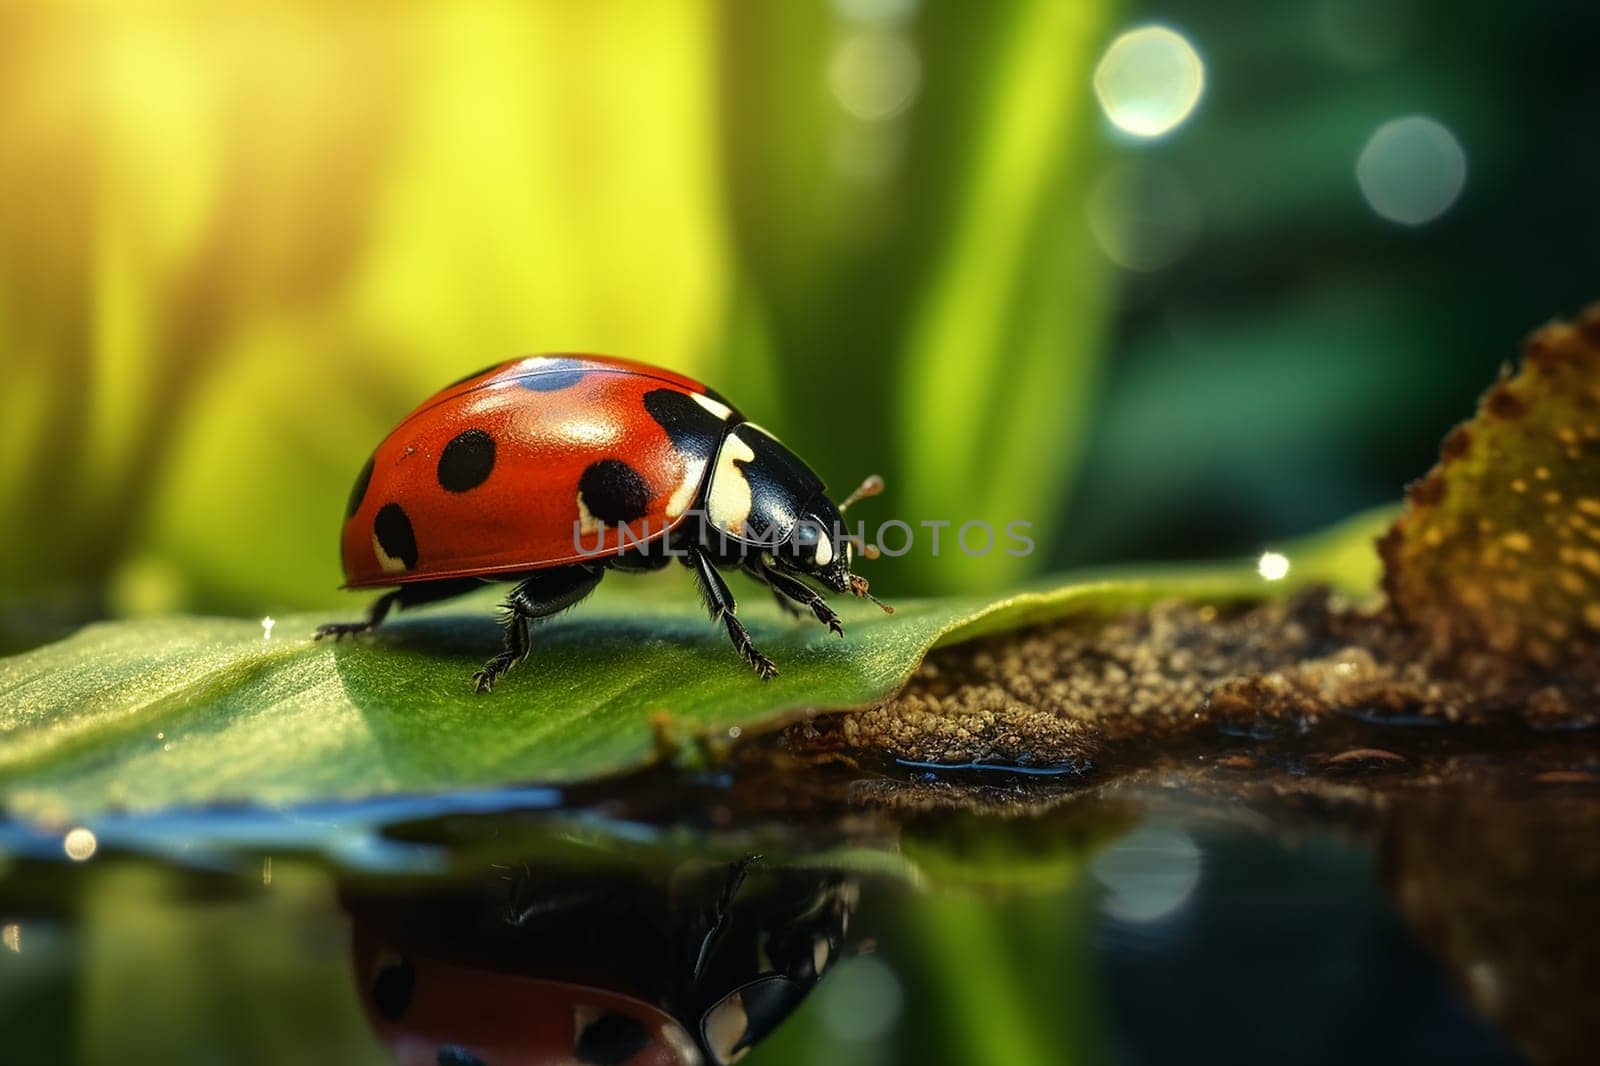 A close-up of a ladybug crawling on a leaf. The background is blurred with bokeh. by Hype2art